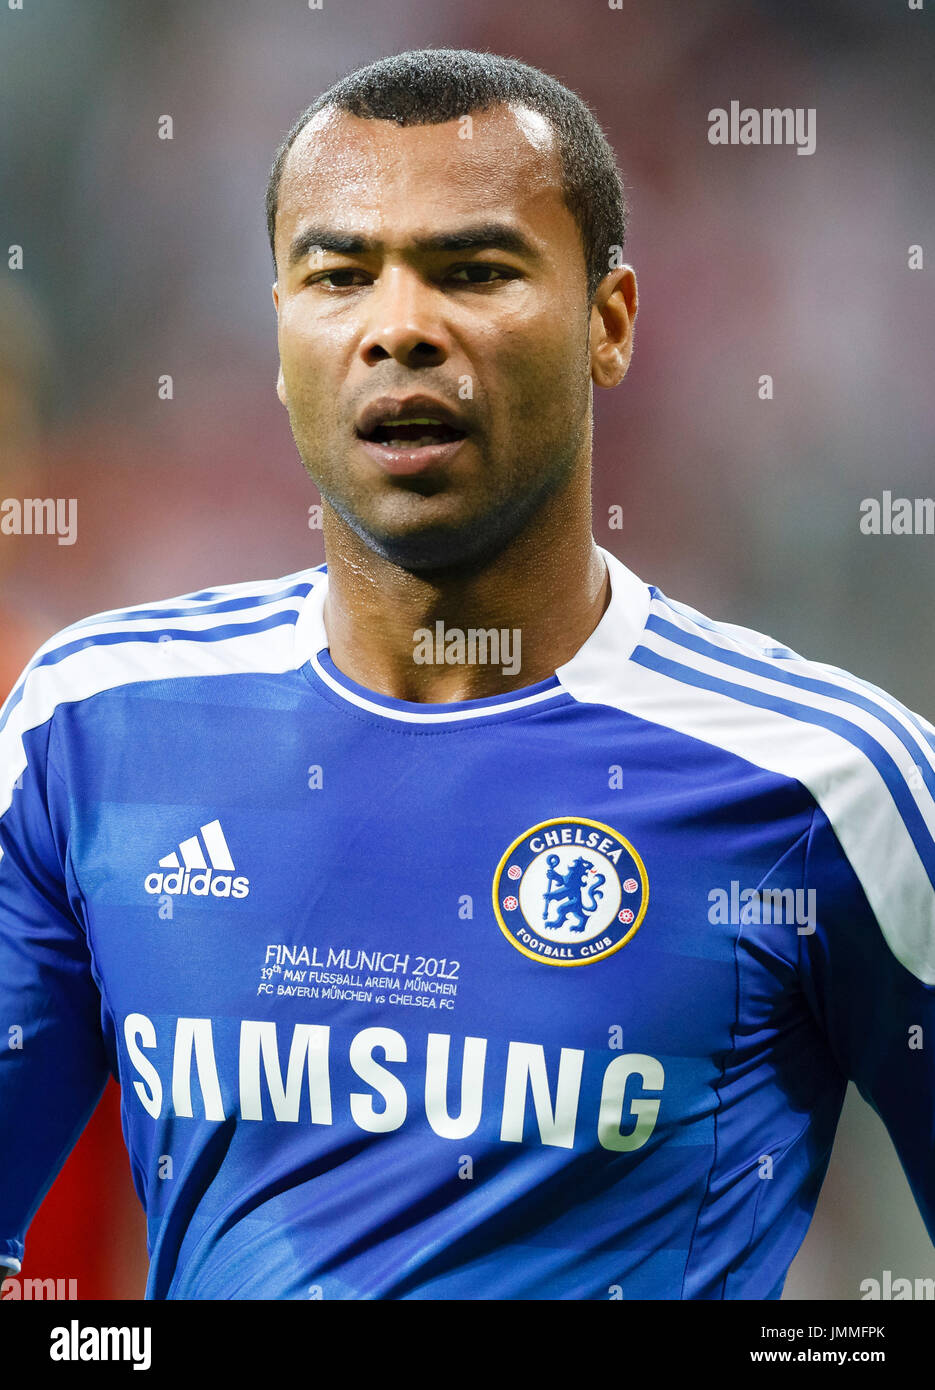 Uefa Champions League Final Bayern Munich Vs Chelsea High Resolution Stock  Photography and Images - Alamy